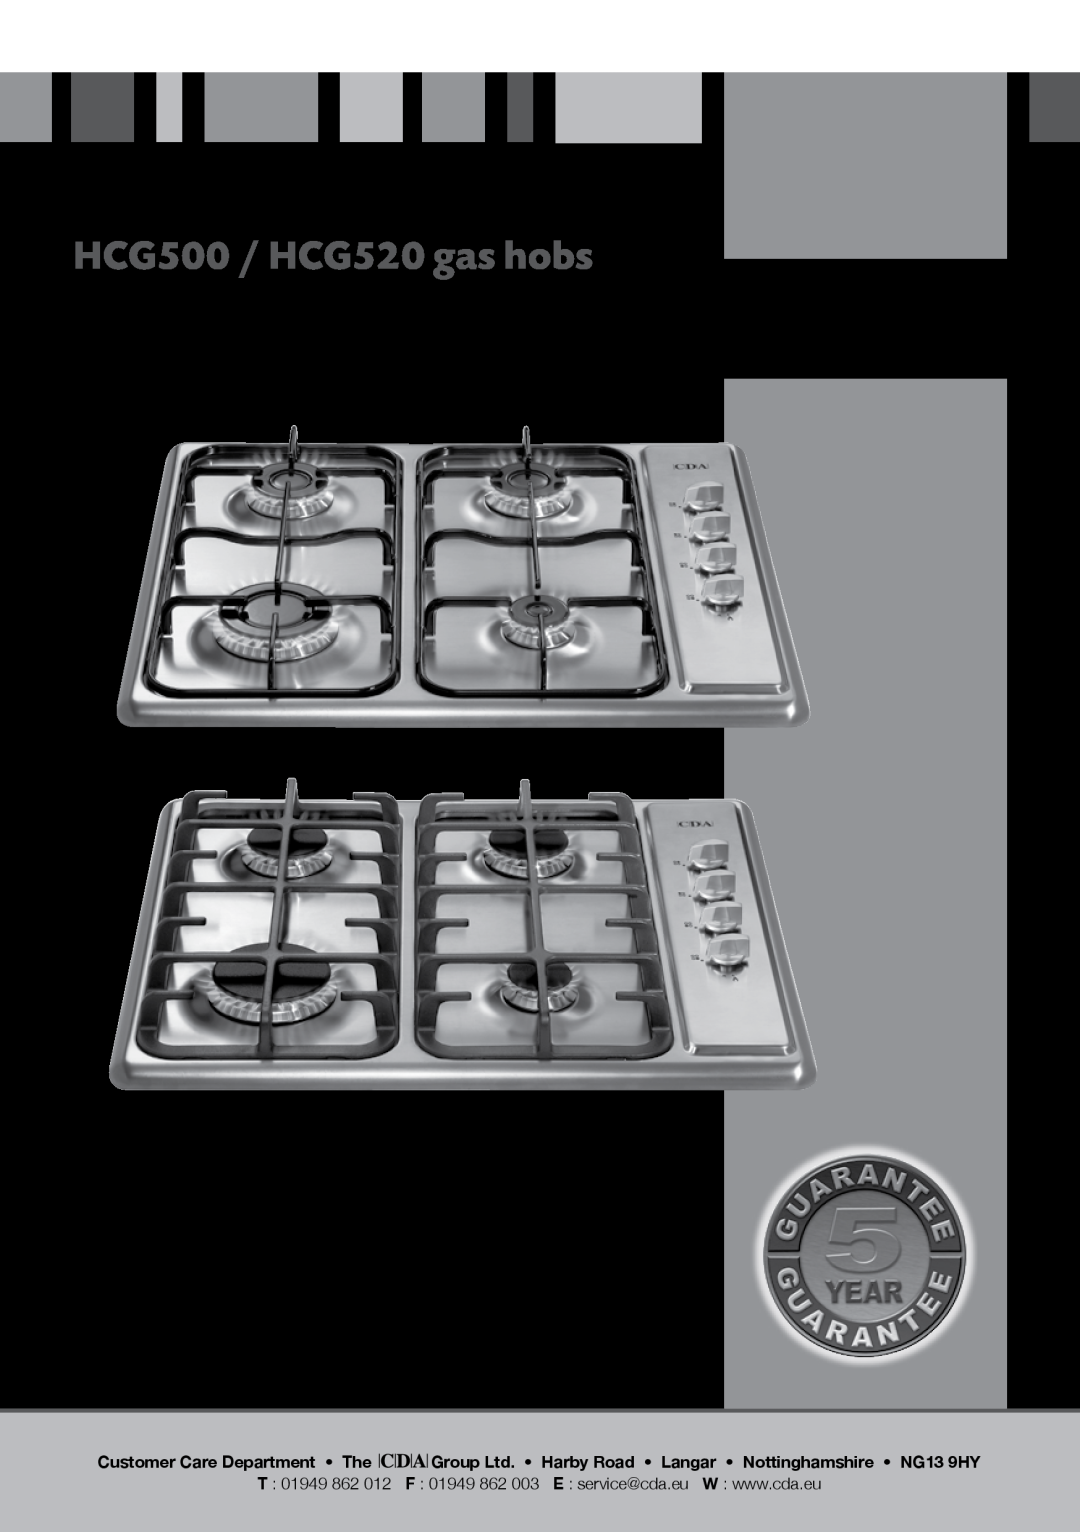 CDA manual Customer Care Department The, HCG500 / HCG520 gas hobs, Manual for Installation, Use and Maintenance 